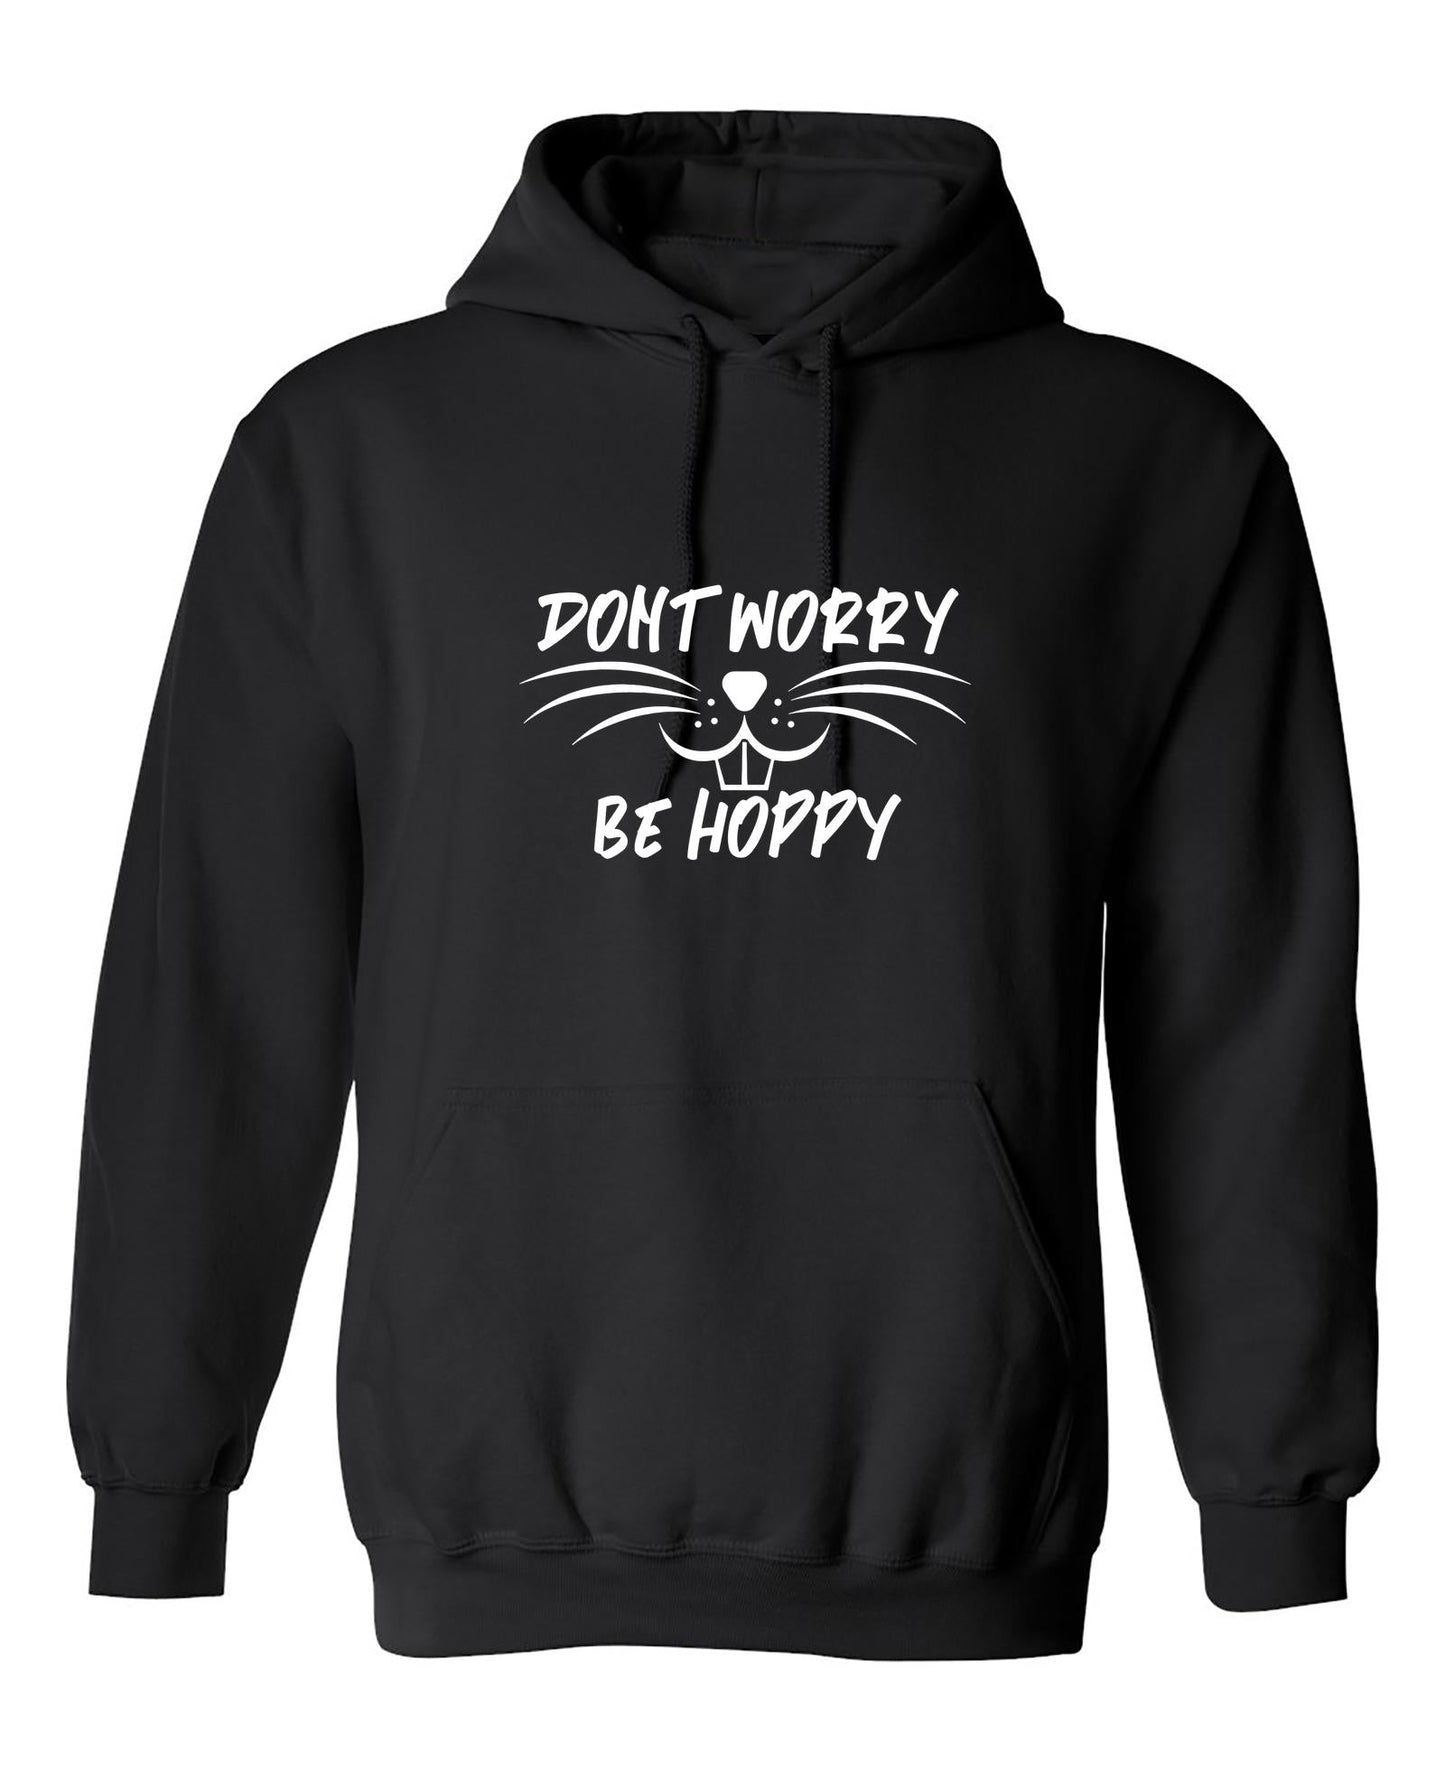 Funny T-Shirts design "Don't Worry, Be Hoppy"